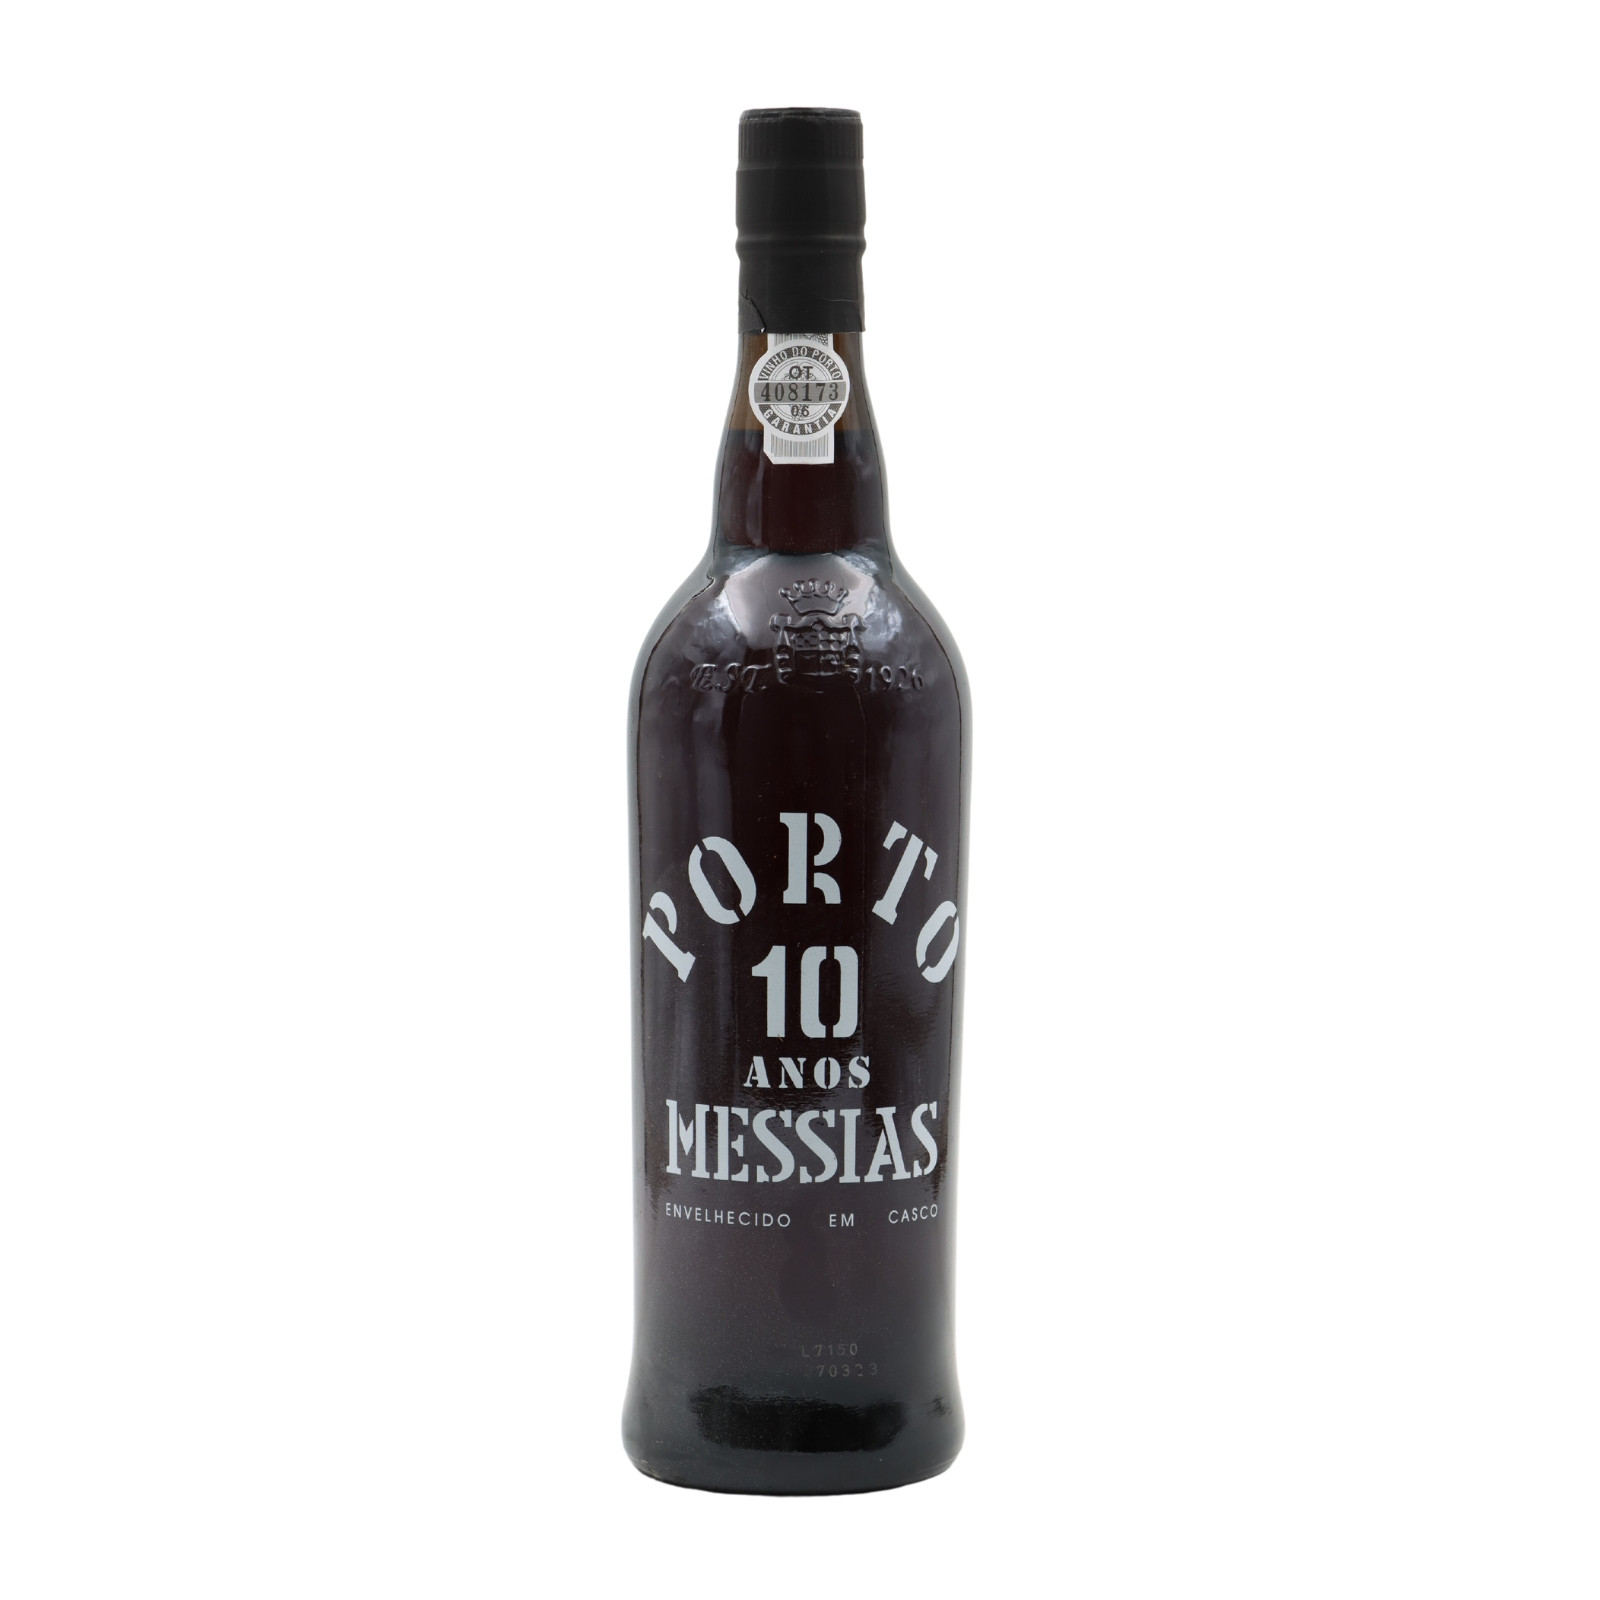 Messias 10 years Port